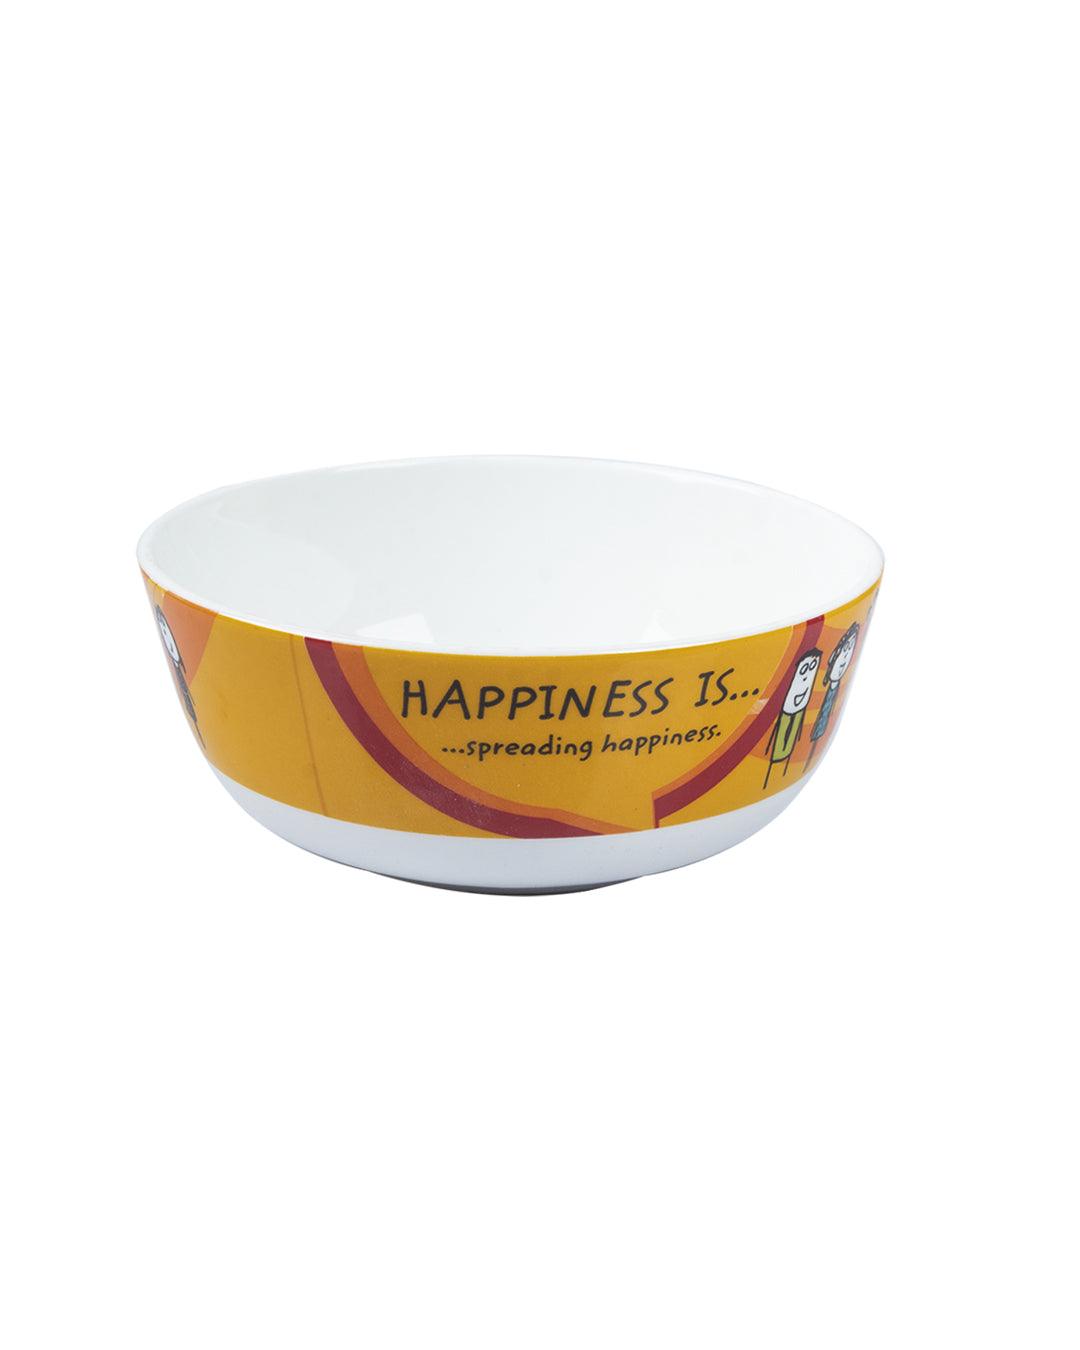 Market 99 - 'HAPPINESS IS … spreading happiness' Graphic Print Serving Bowl Katoris In Ceramic (Set of 4, 340 mL) - MARKET 99